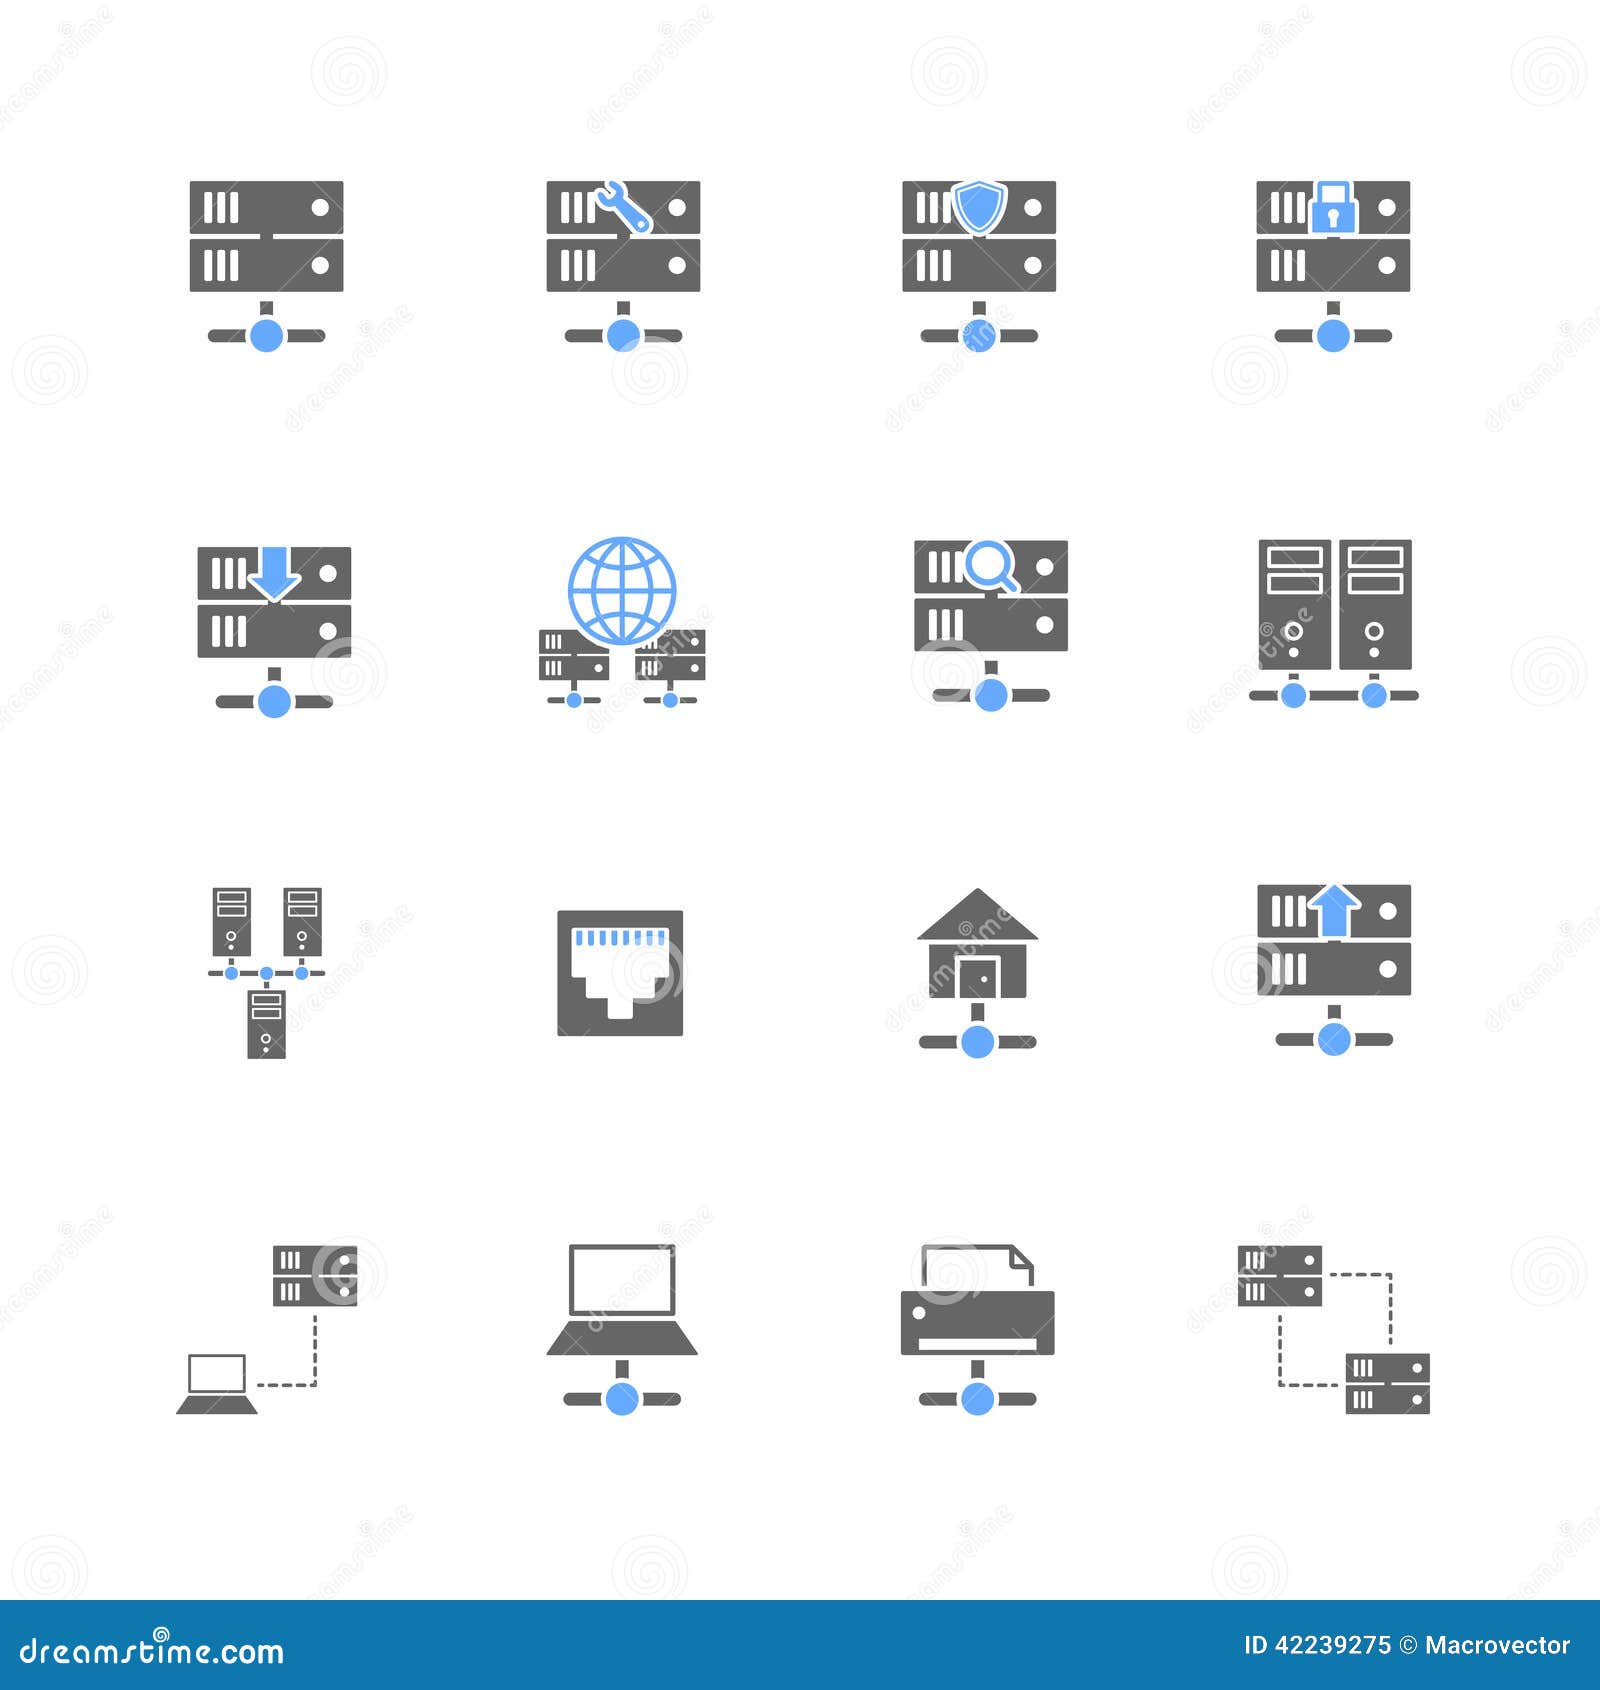 Hosting Icons Set stock vector. Illustration of chip - 42239275